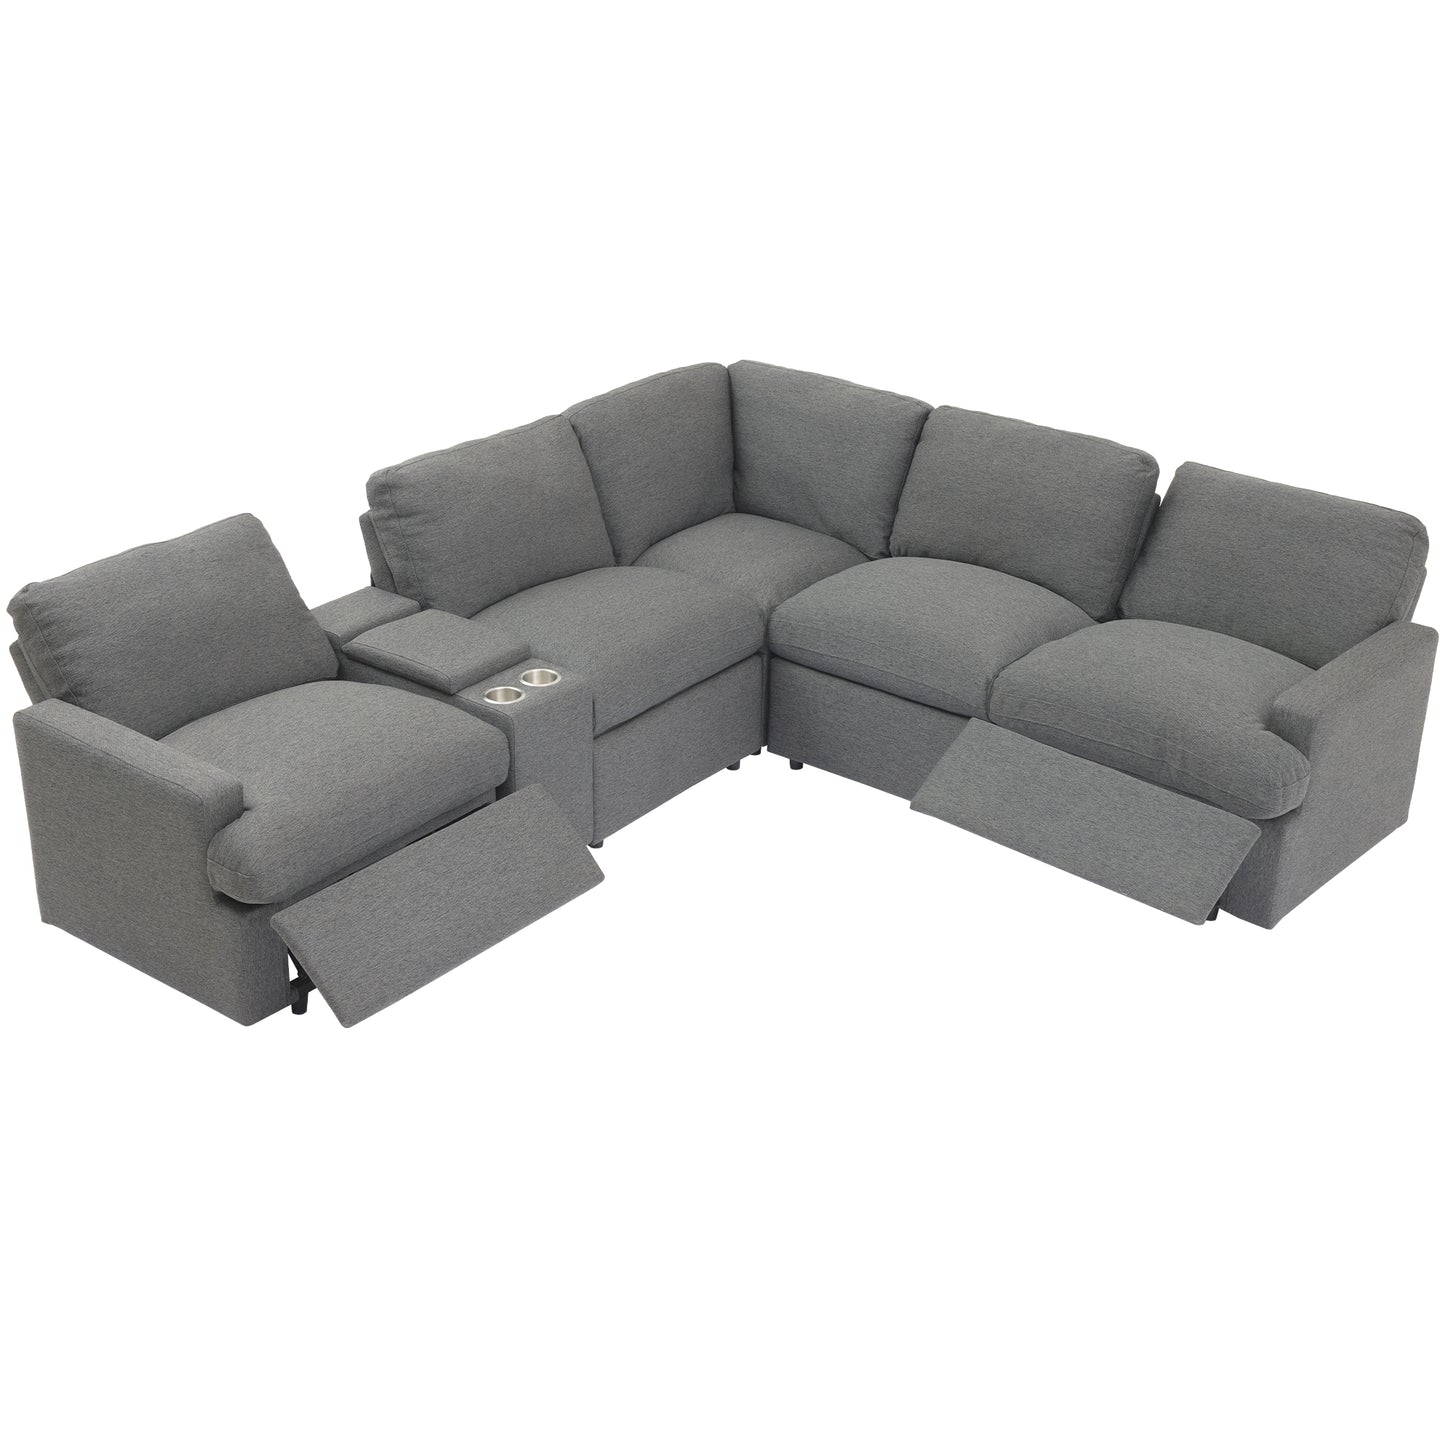 Luxury Dark Grey Power Recliner Sectional Sofa with USB Ports and Storage Box